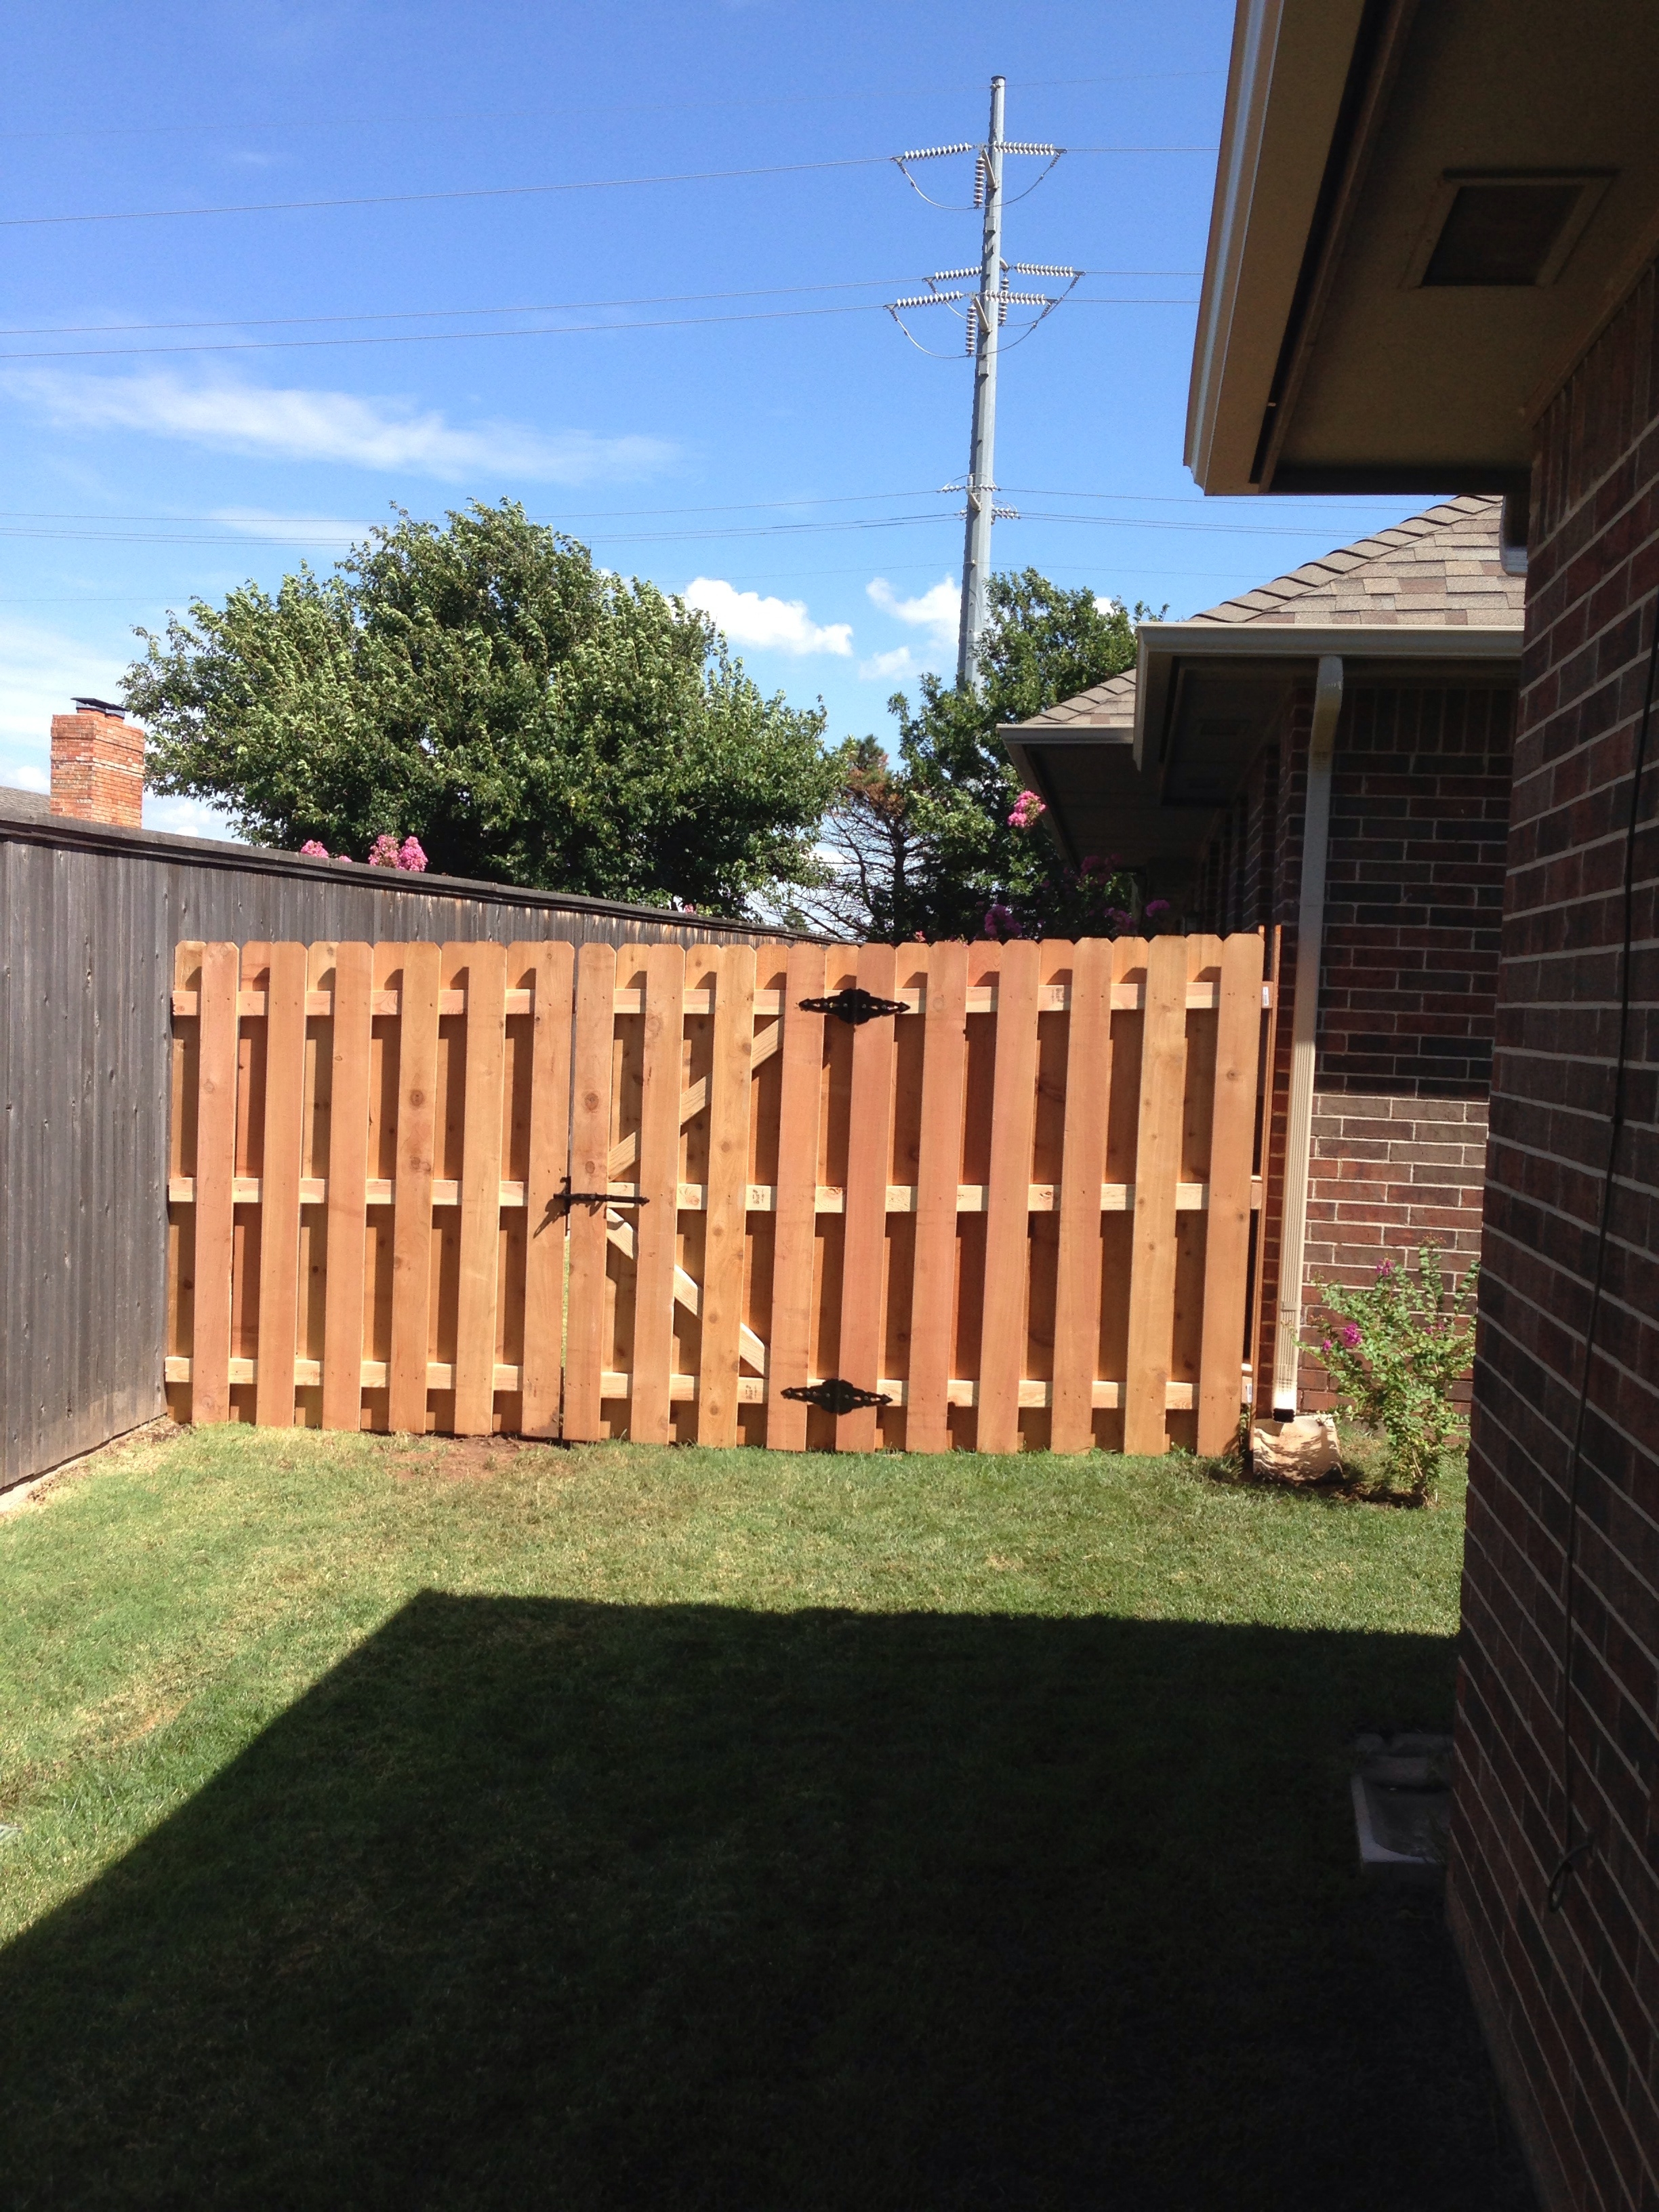 Mike Garza Fence Co. Coupons near me in Mcloud | 8coupons